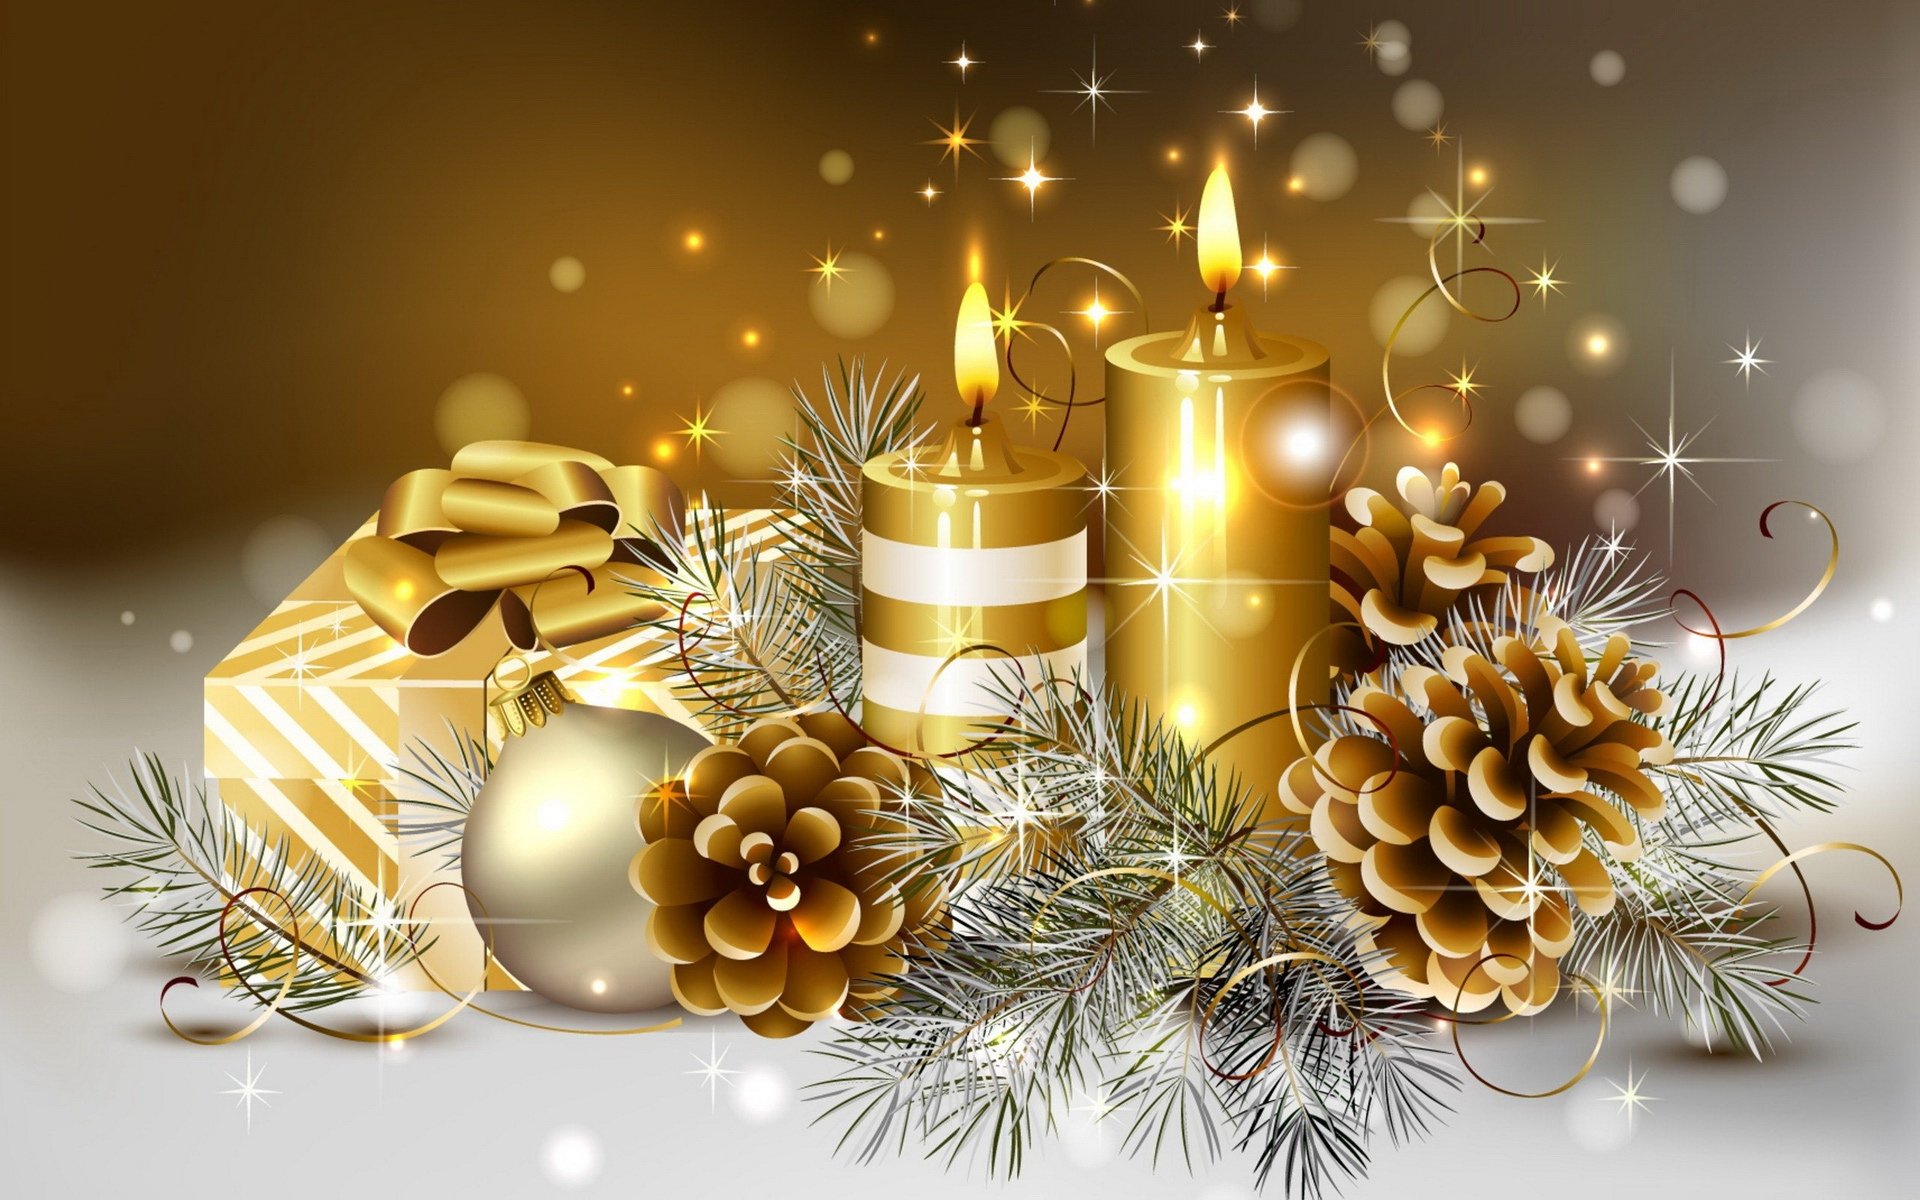 Free Christmas Wallpaper Backgrounds Wallpapers9 1920x1200